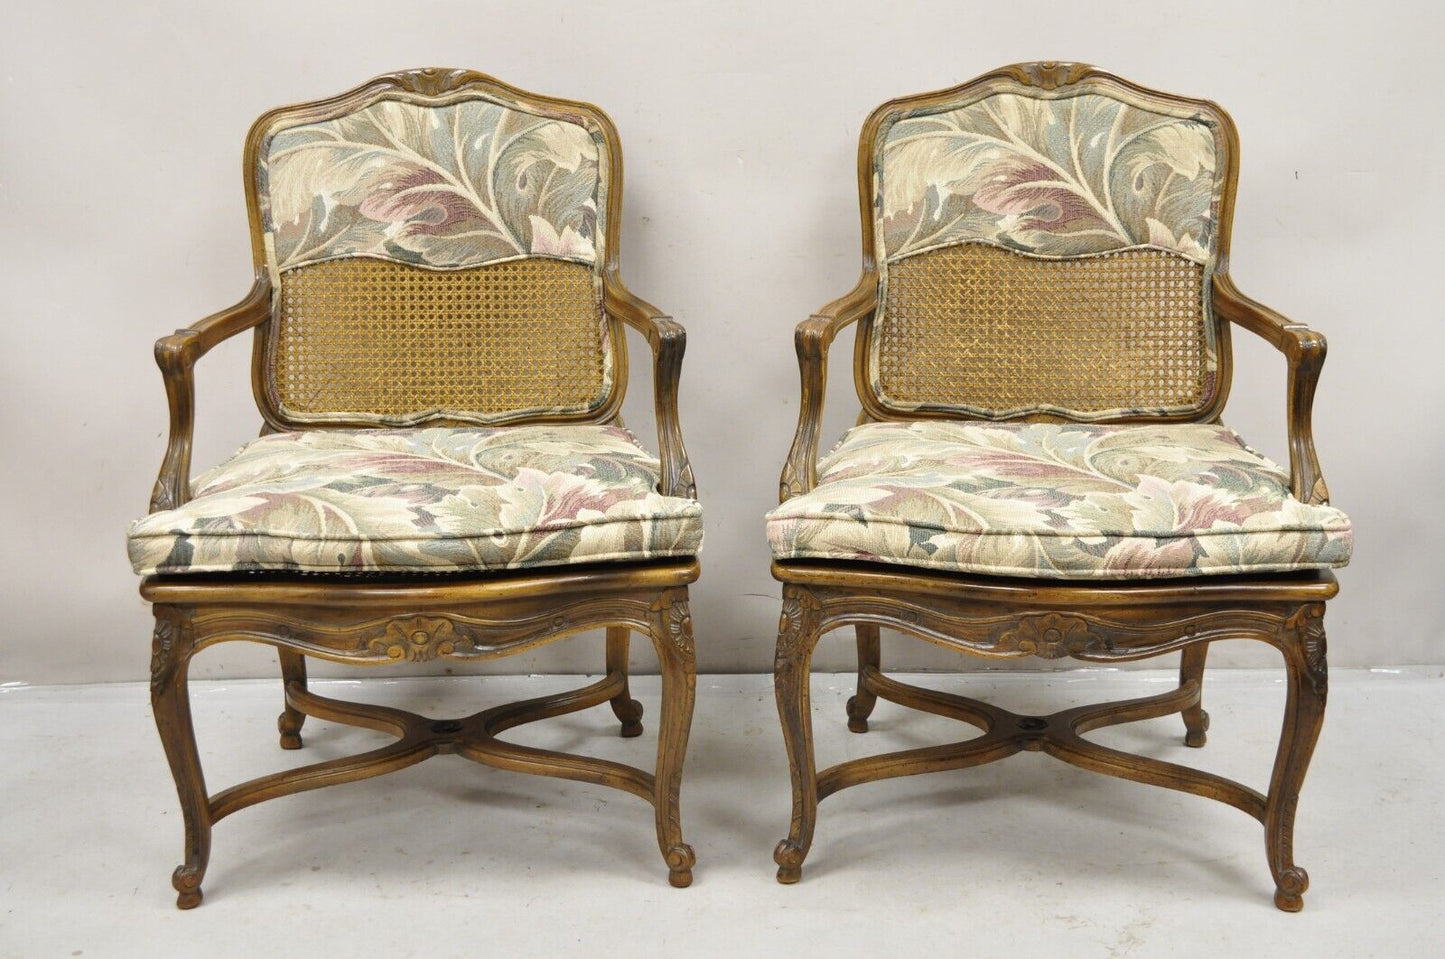 Pair Vintage French Country Louis XV Style Upholstery and Cane Lounge Arm Chairs